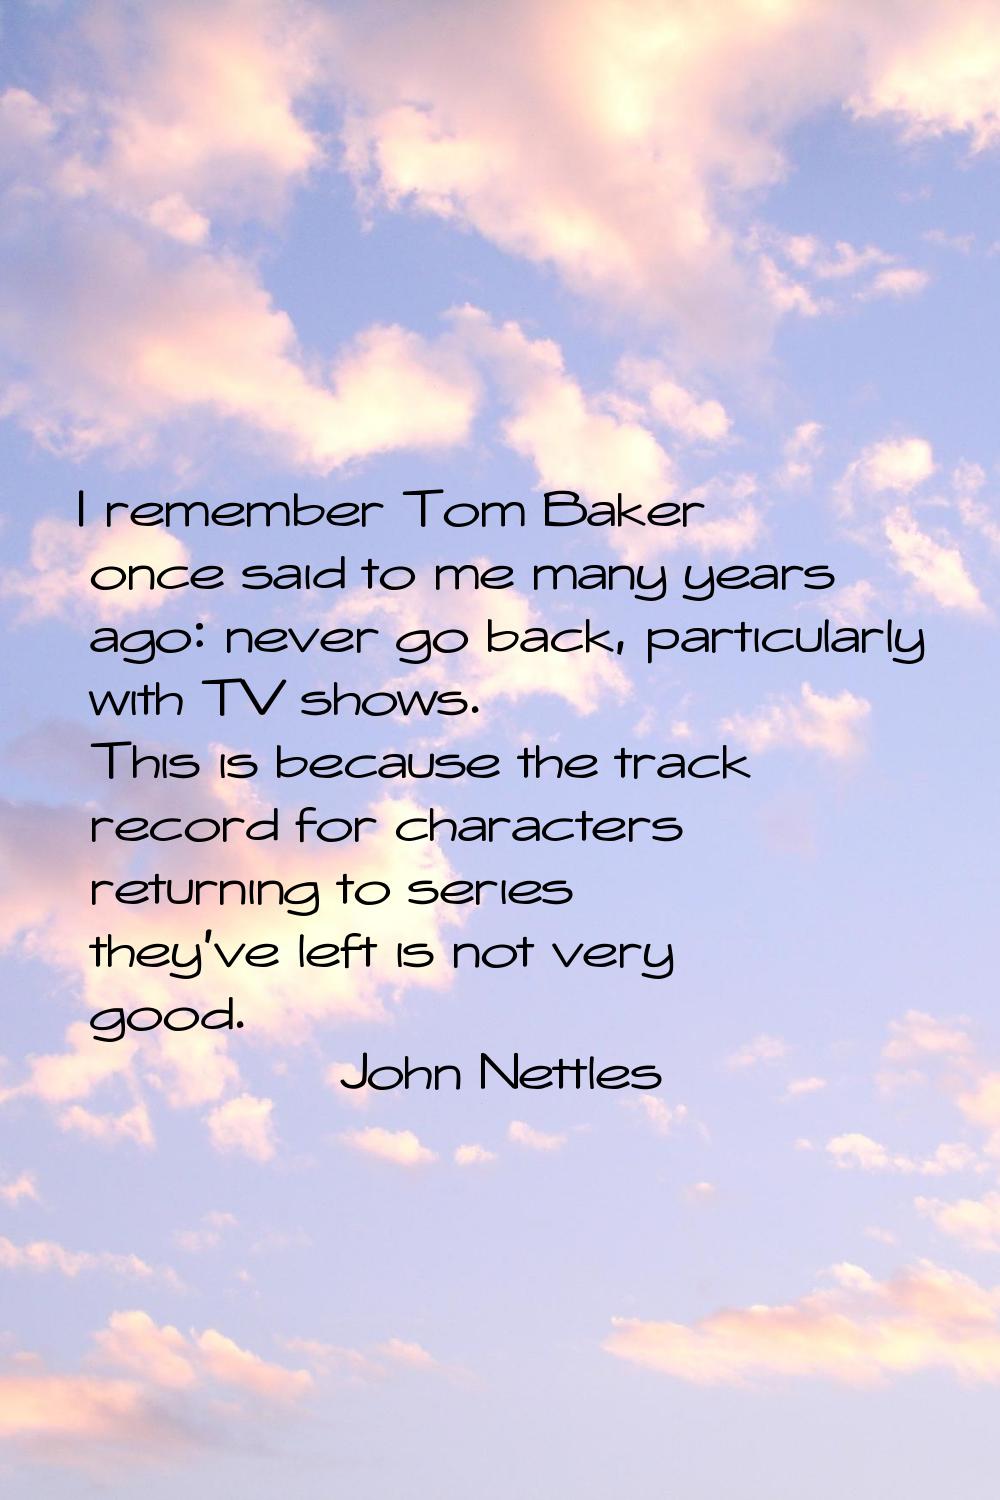 I remember Tom Baker once said to me many years ago: never go back, particularly with TV shows. Thi